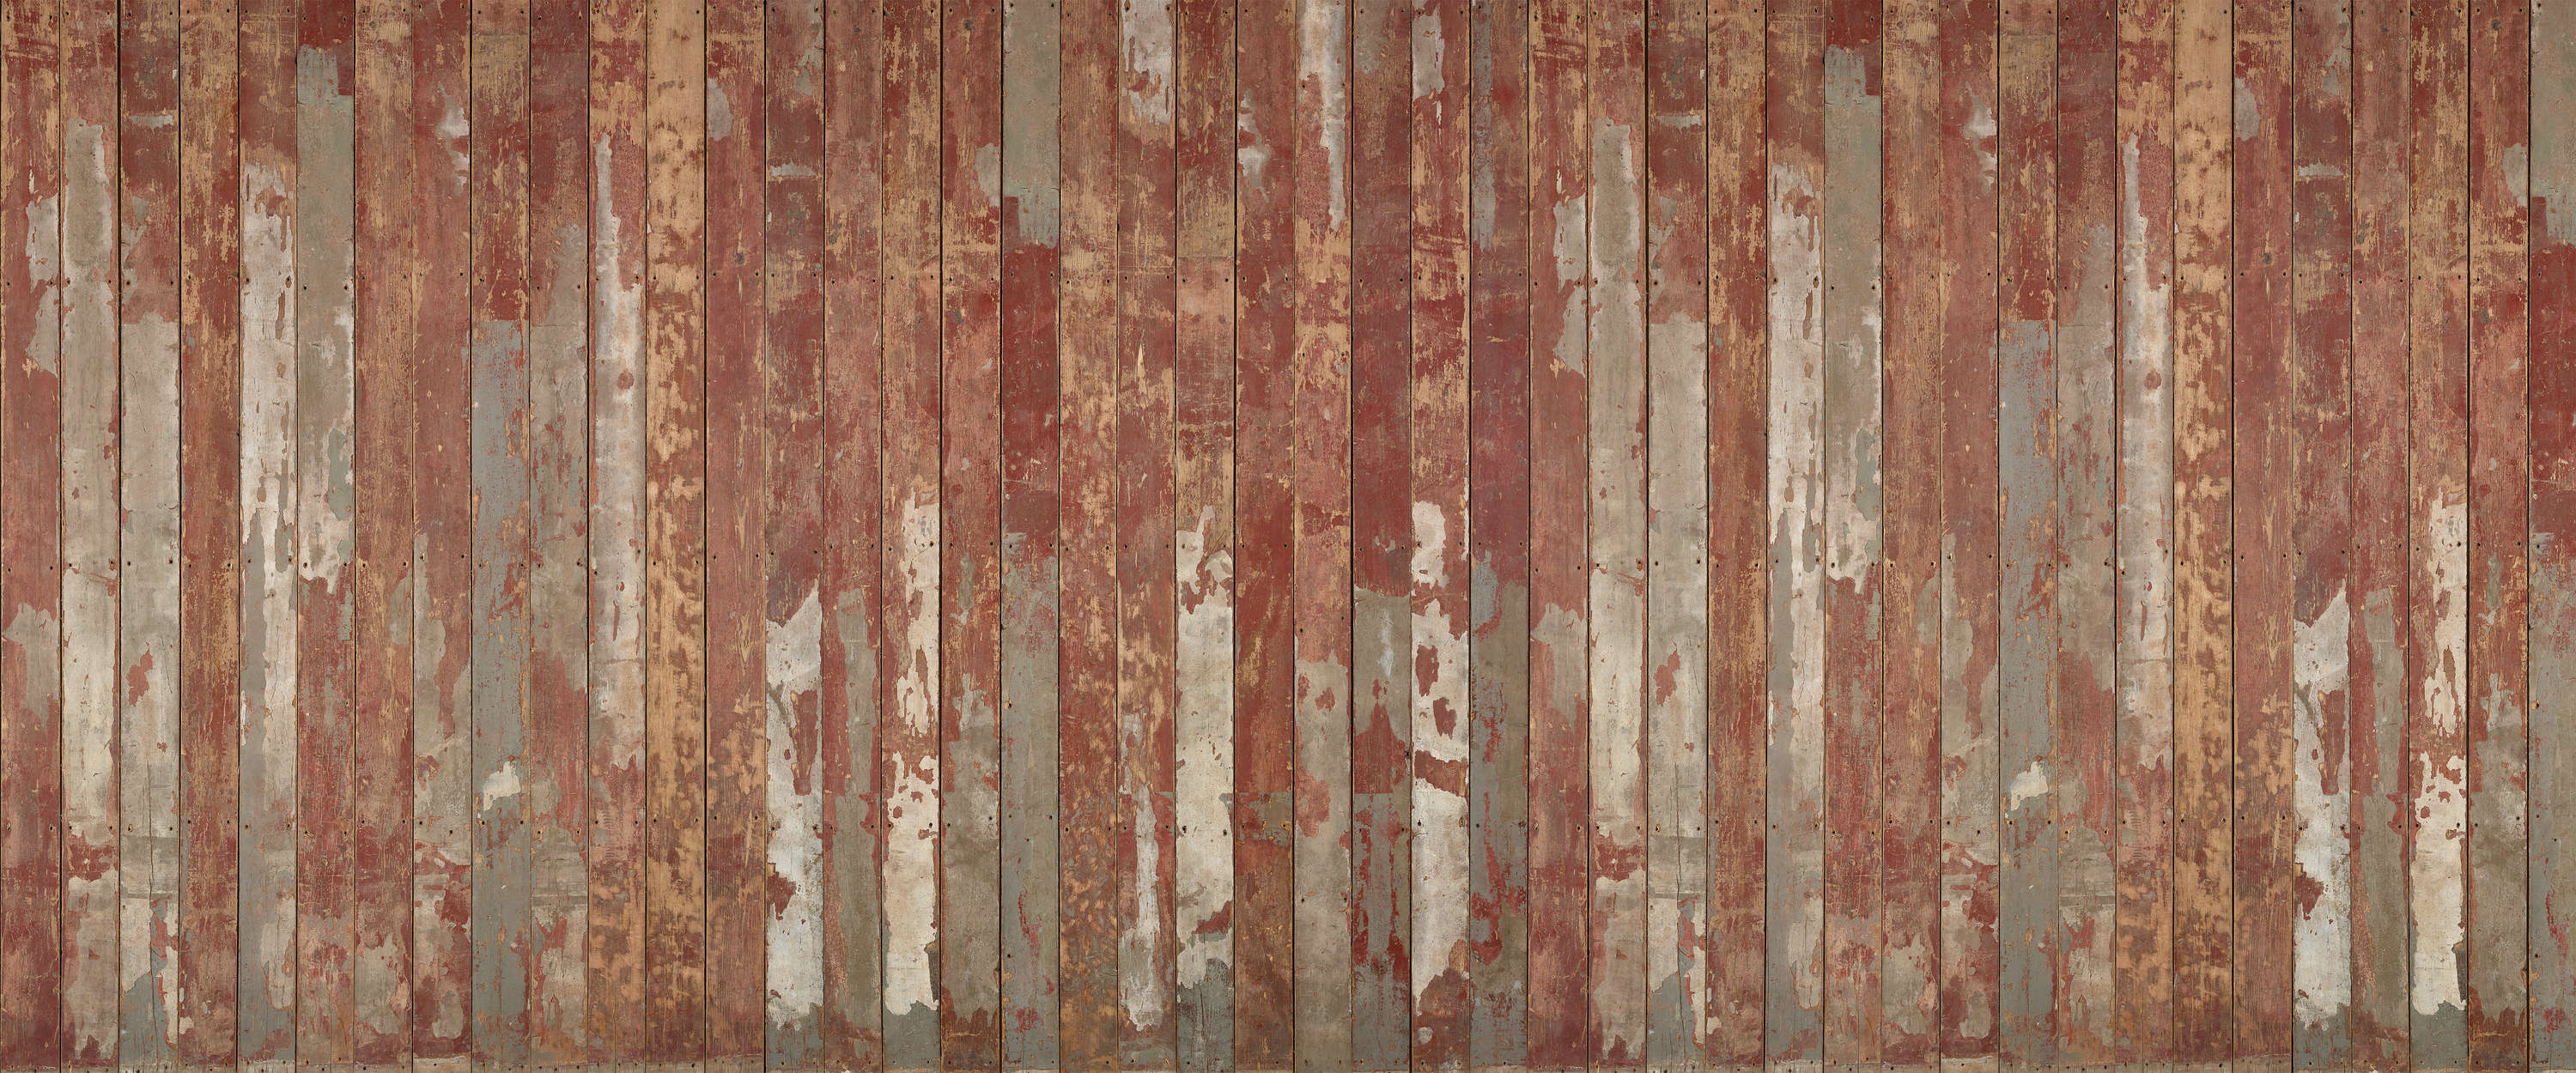             Photo wallpaper plank rustic with vintage wood look
        